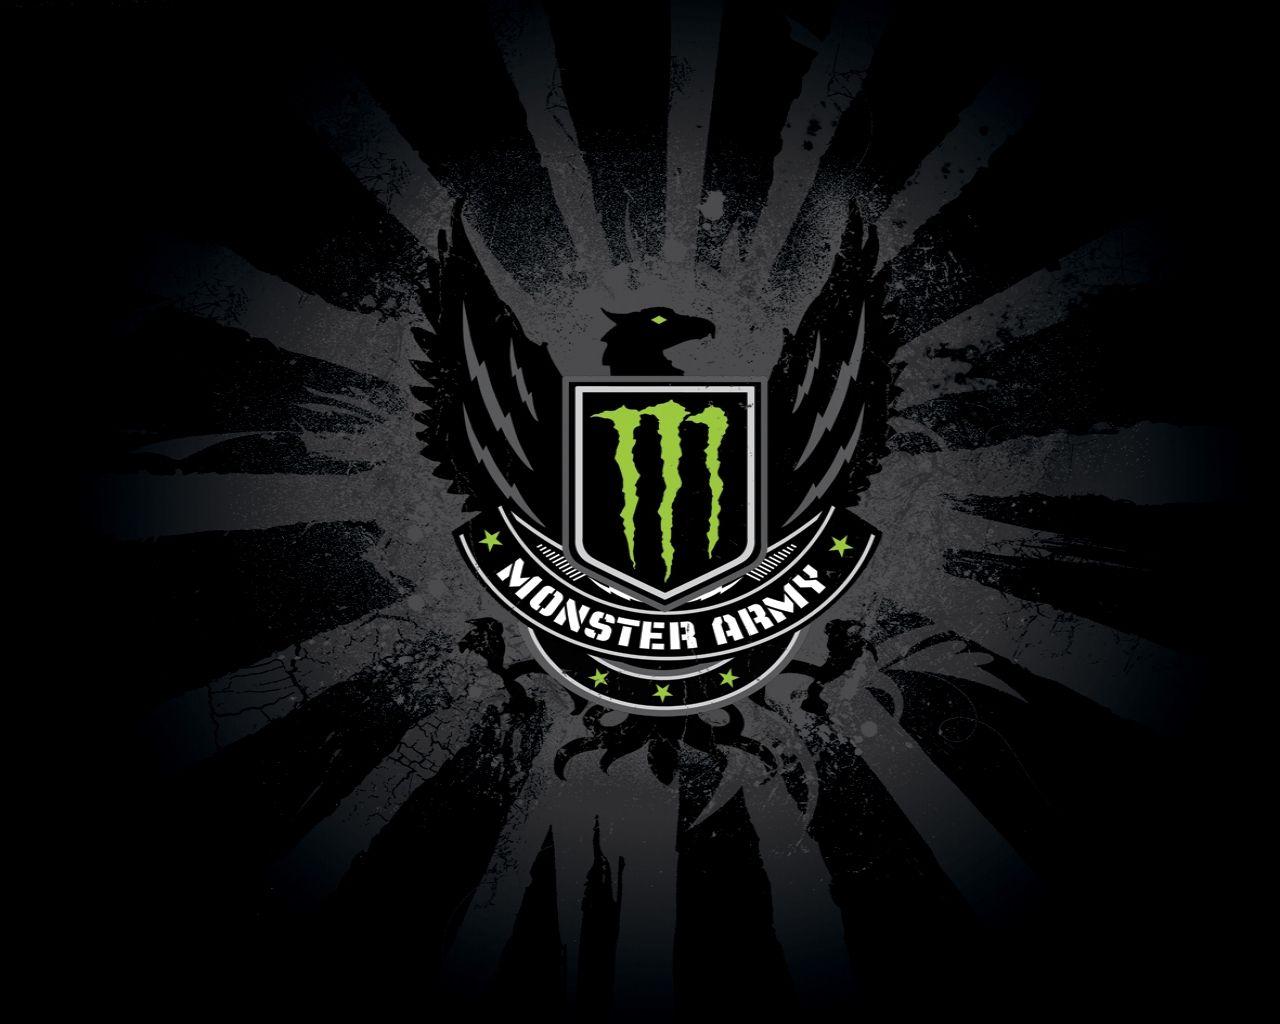 Download the Monster Army Import Wallpaper, Monster Army Import